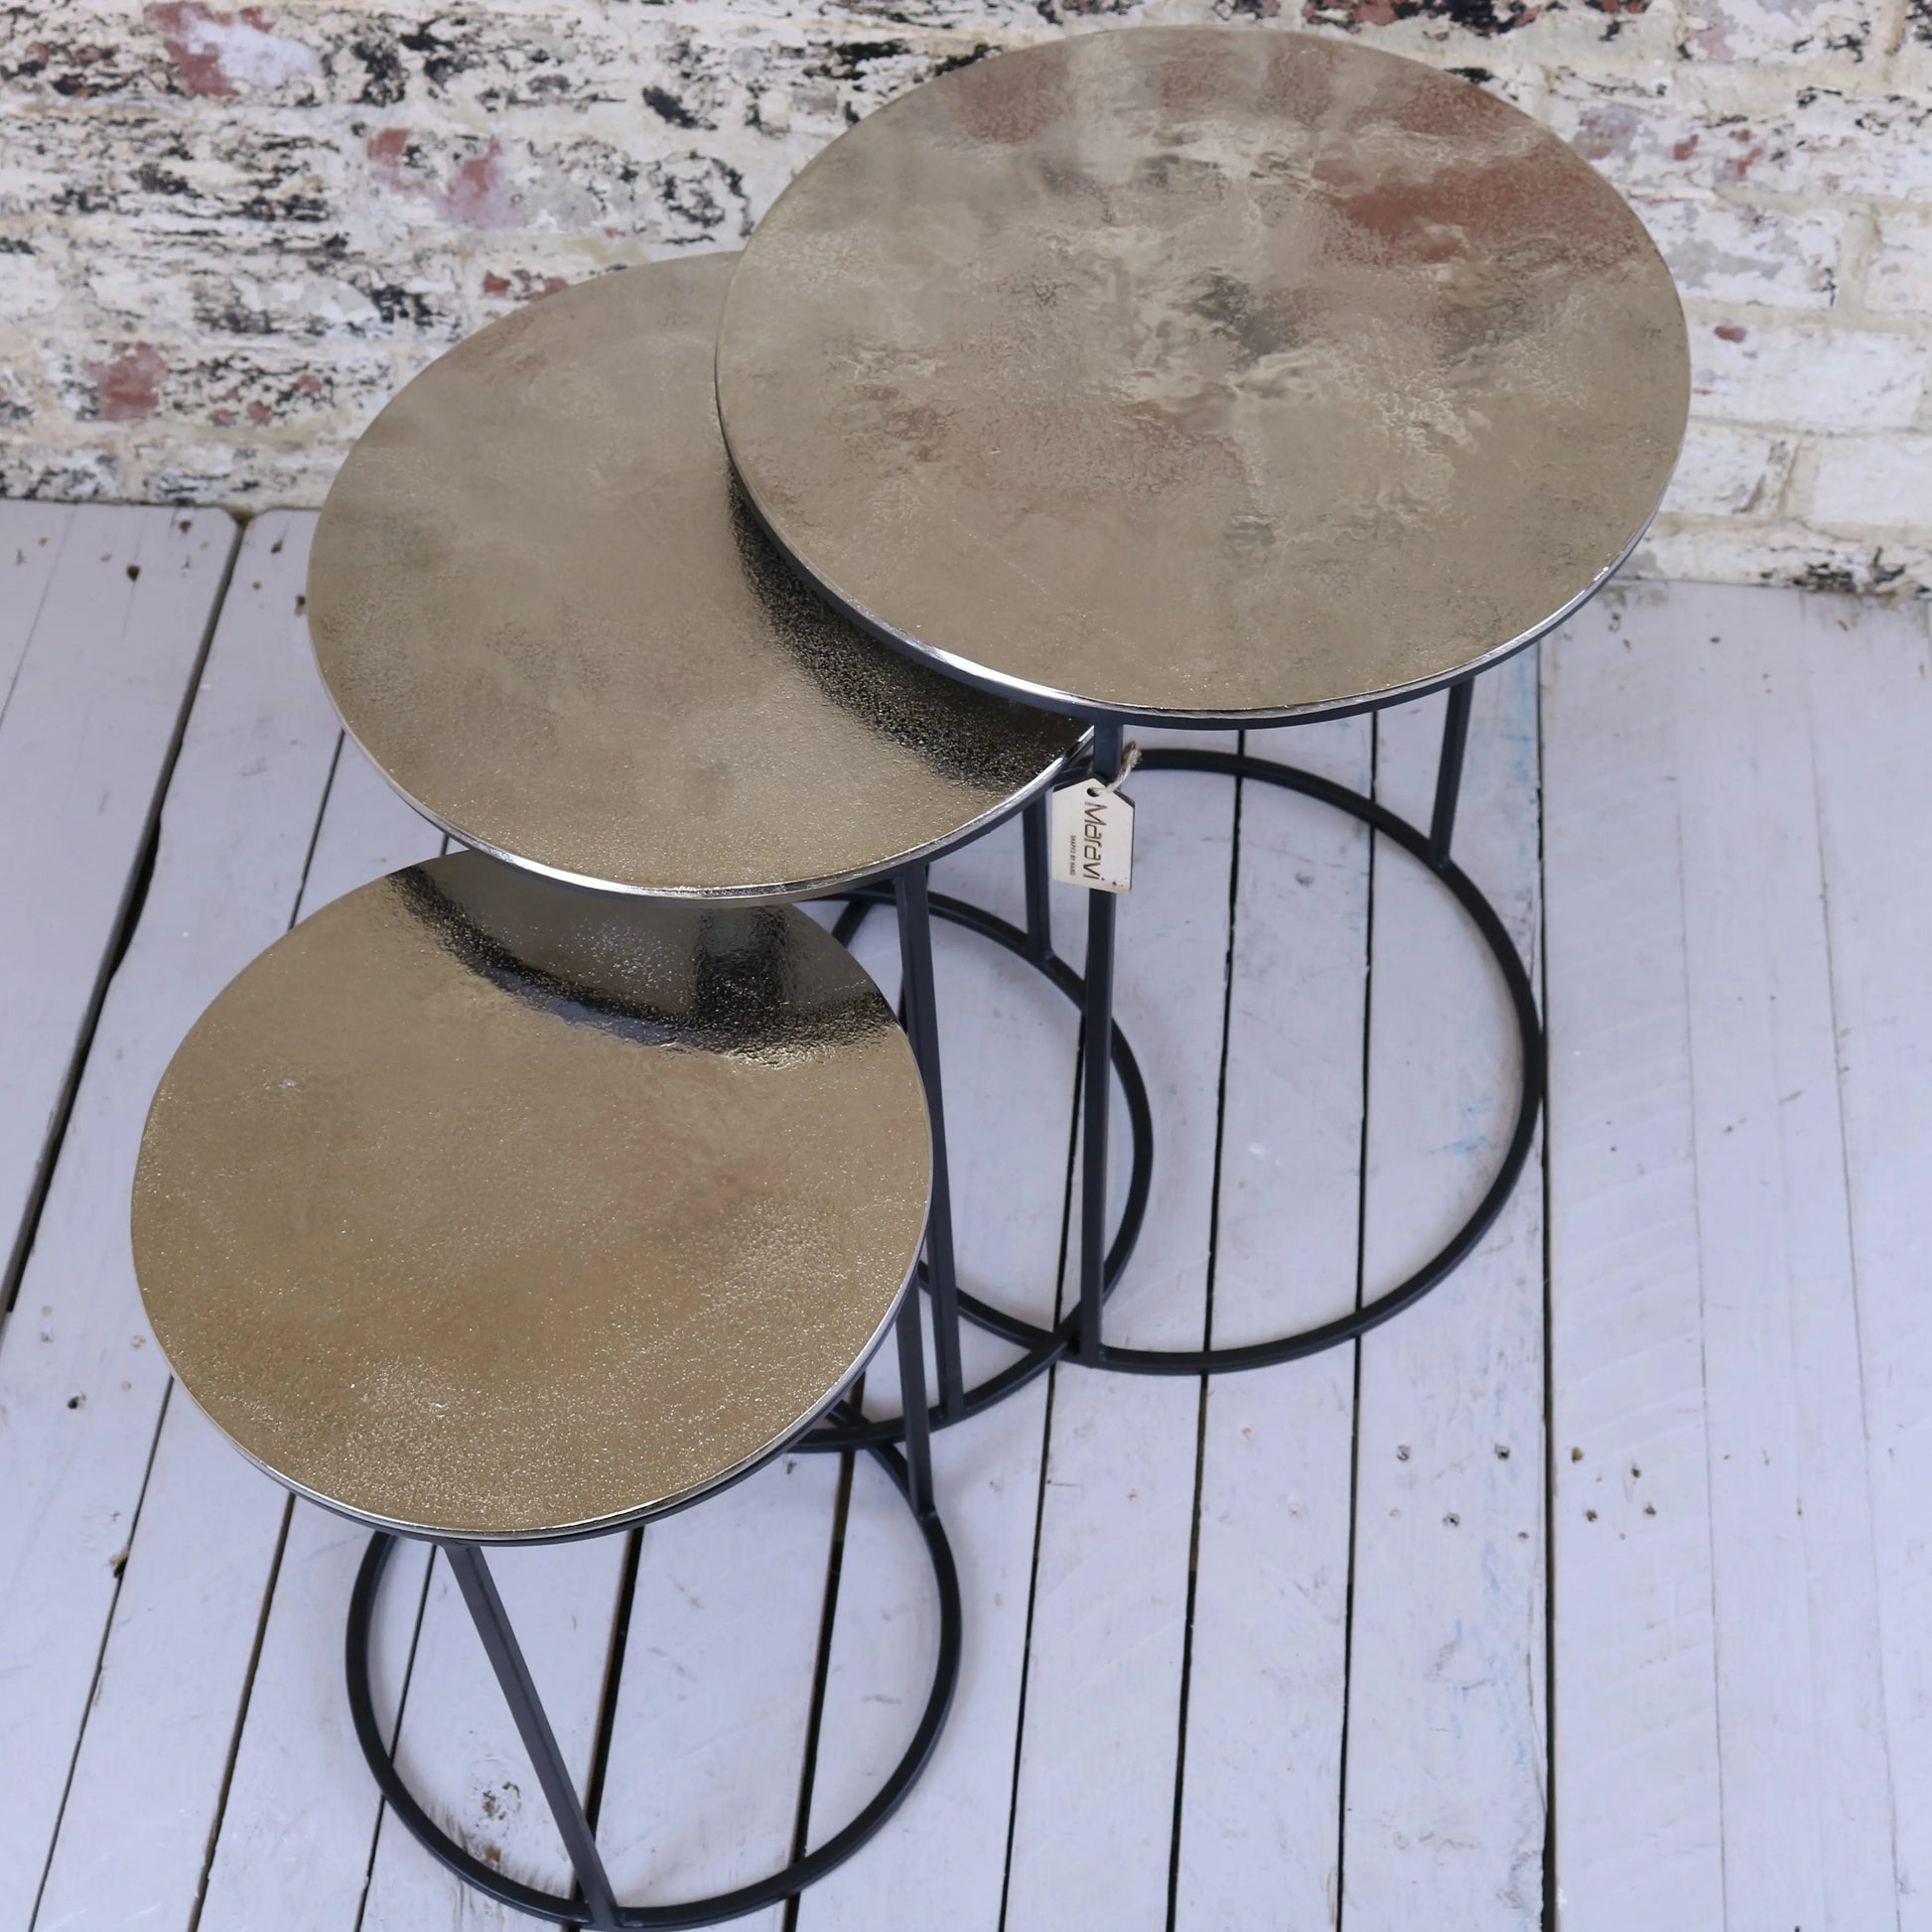 Karari Silver Metal Round Nest of Tables Set of 3 Top View No Props